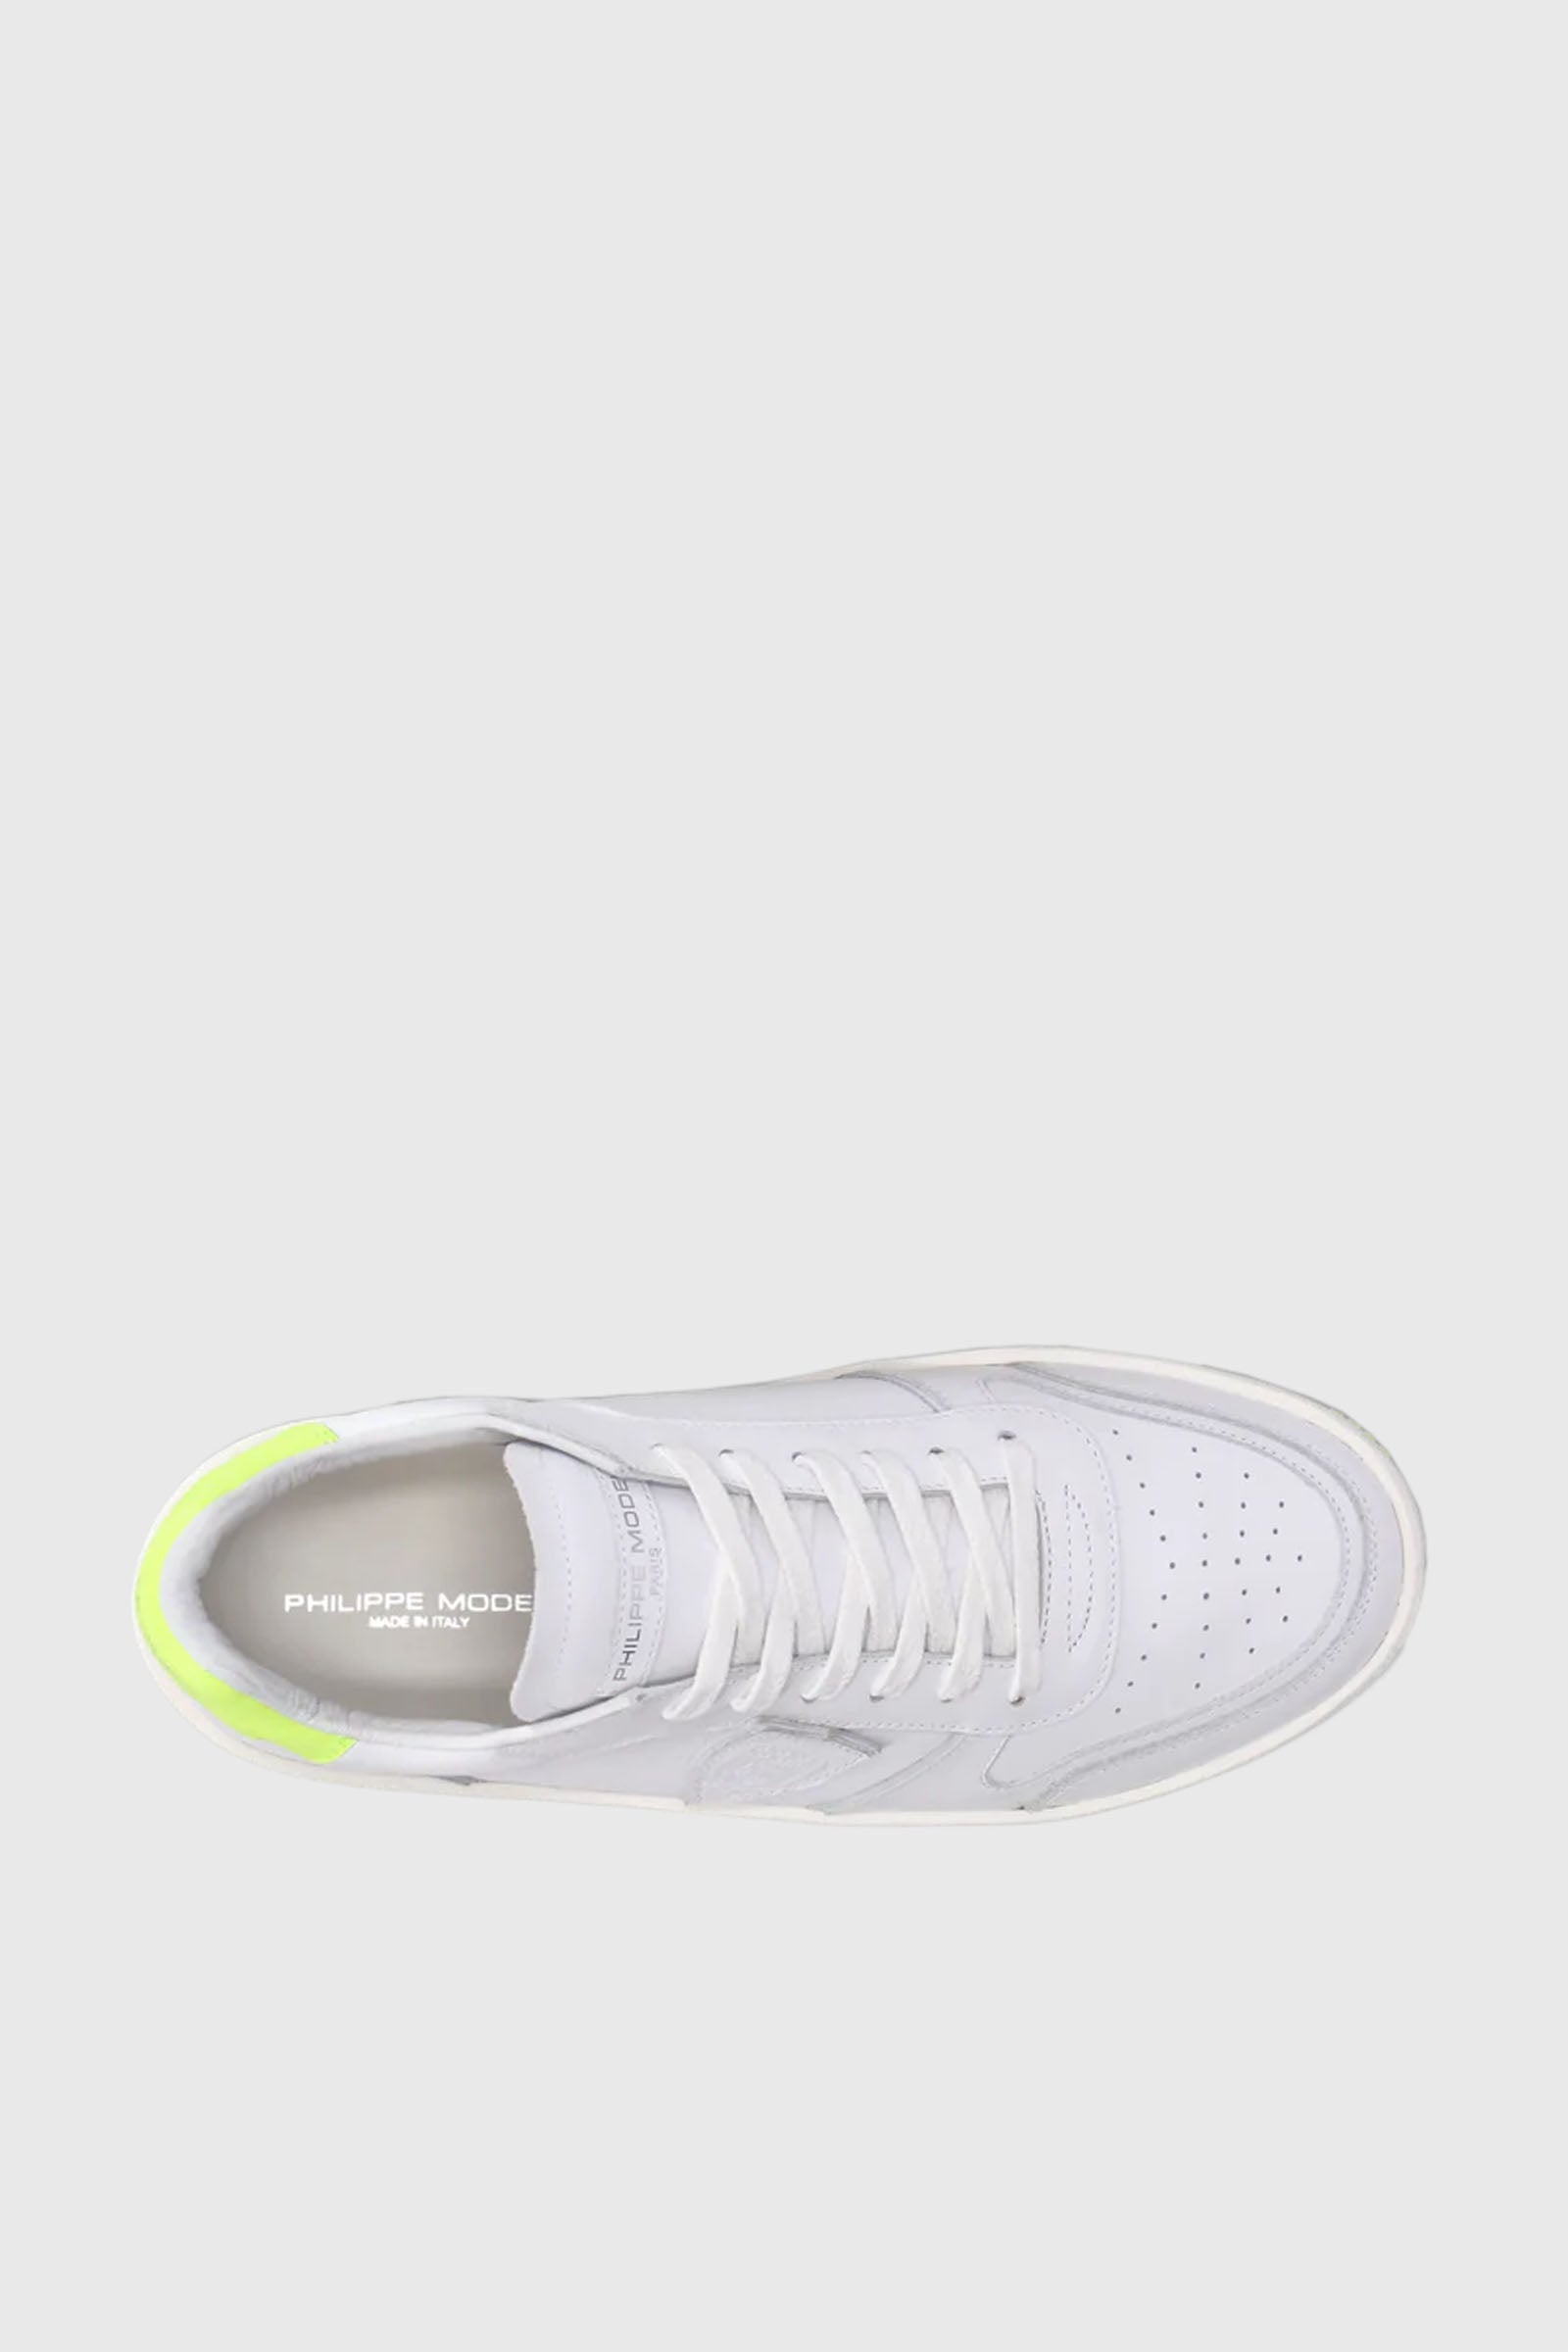 Philippe Model Sneaker Nice Veau Leather White/Yellow Fluo - 4